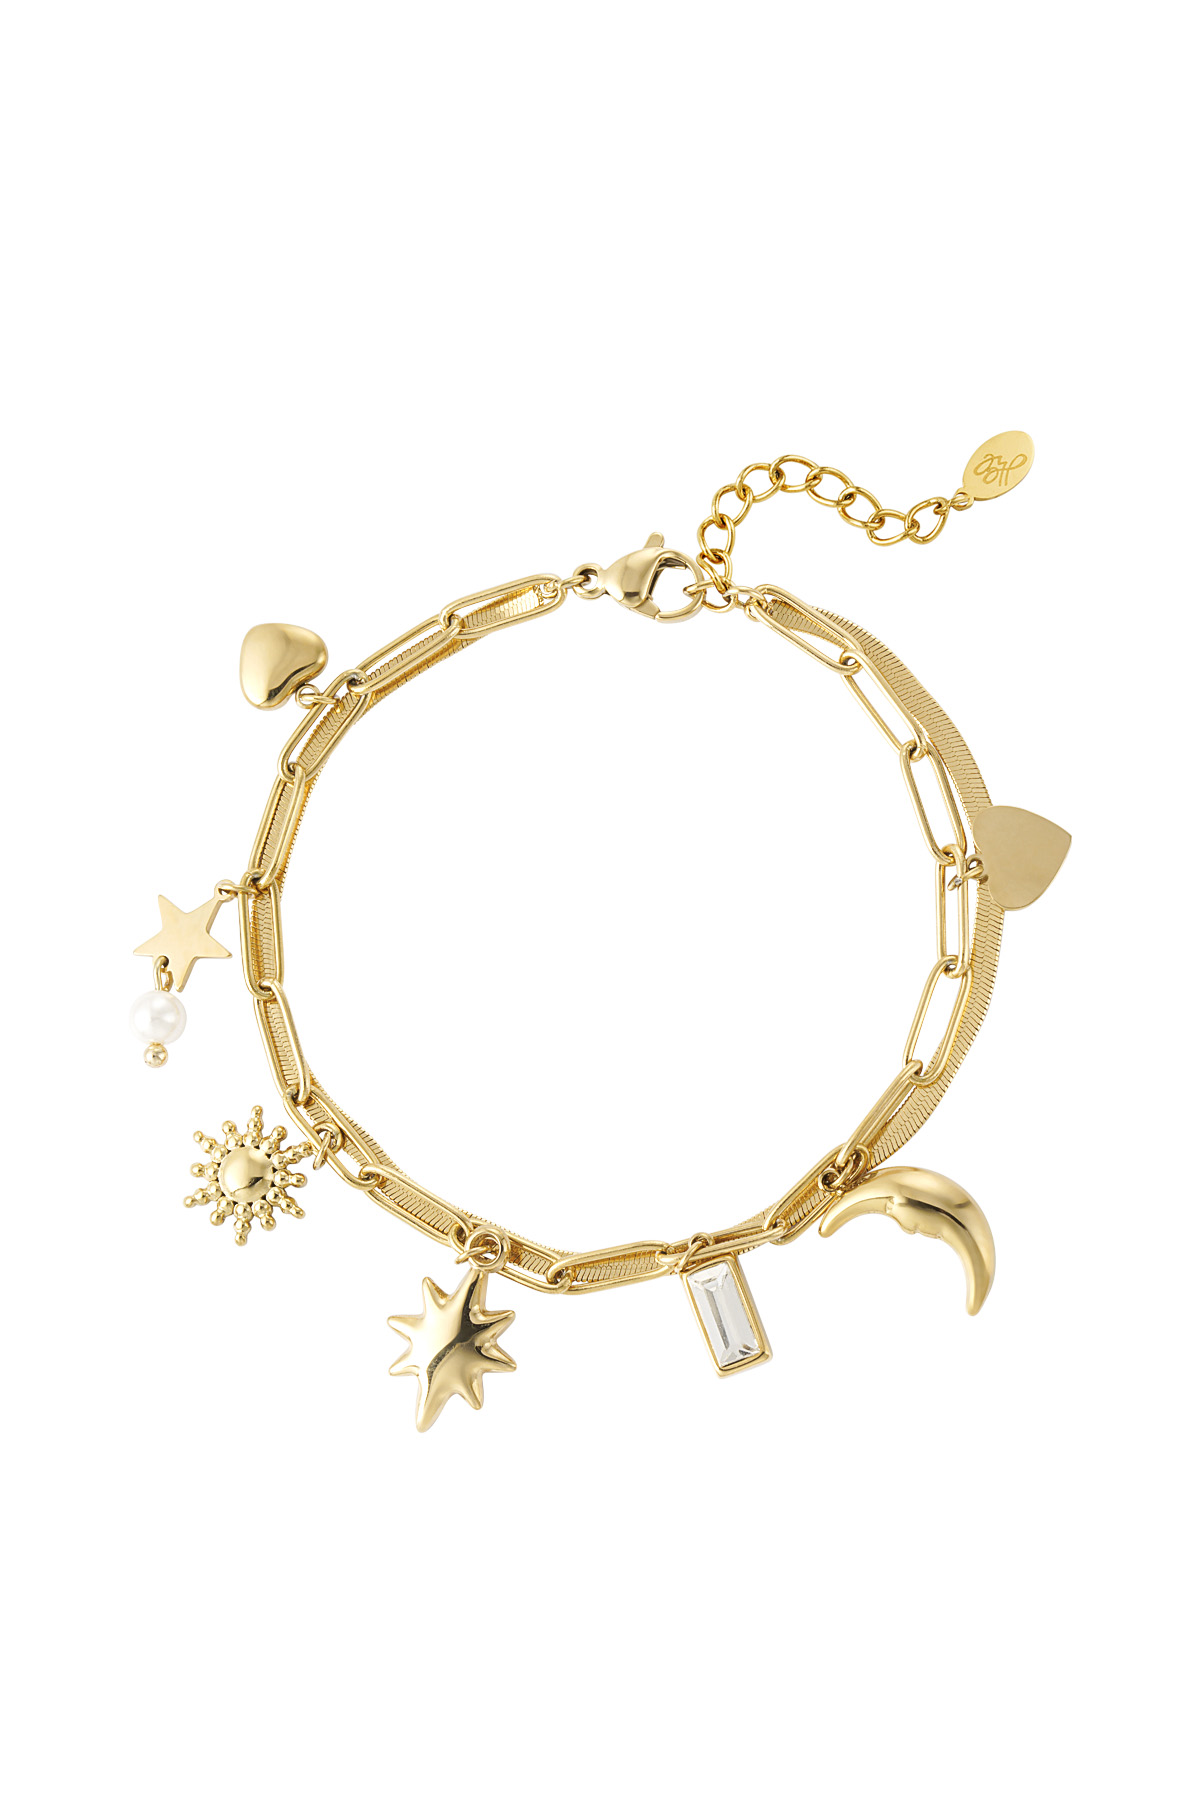 Day and night charm bracelet - gold